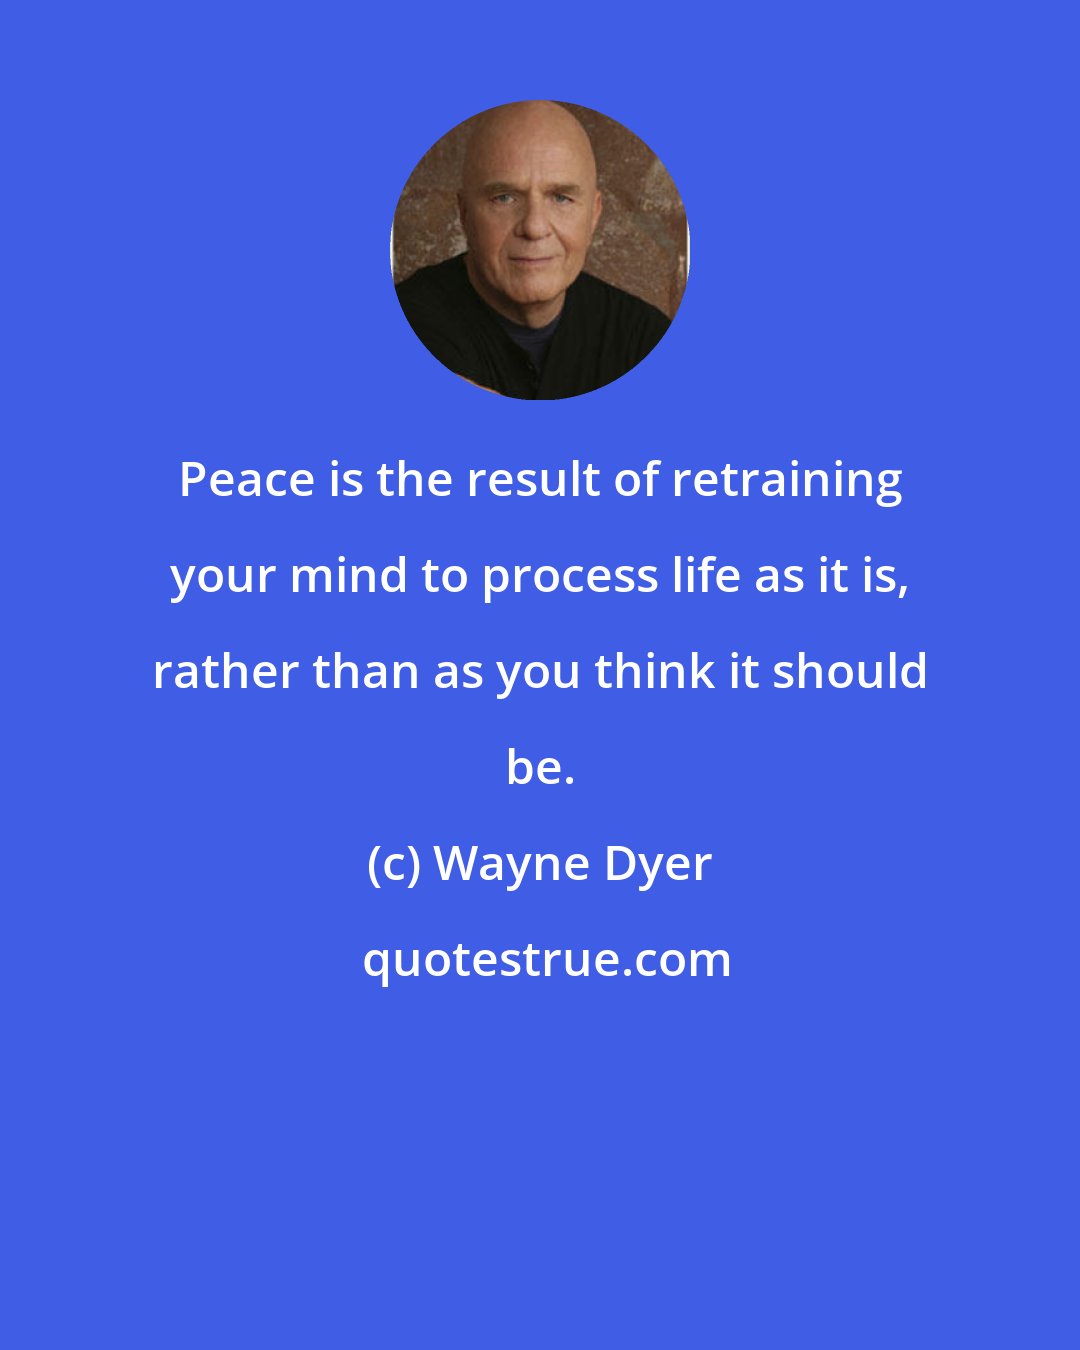 Wayne Dyer: Peace is the result of retraining your mind to process life as it is, rather than as you think it should be.